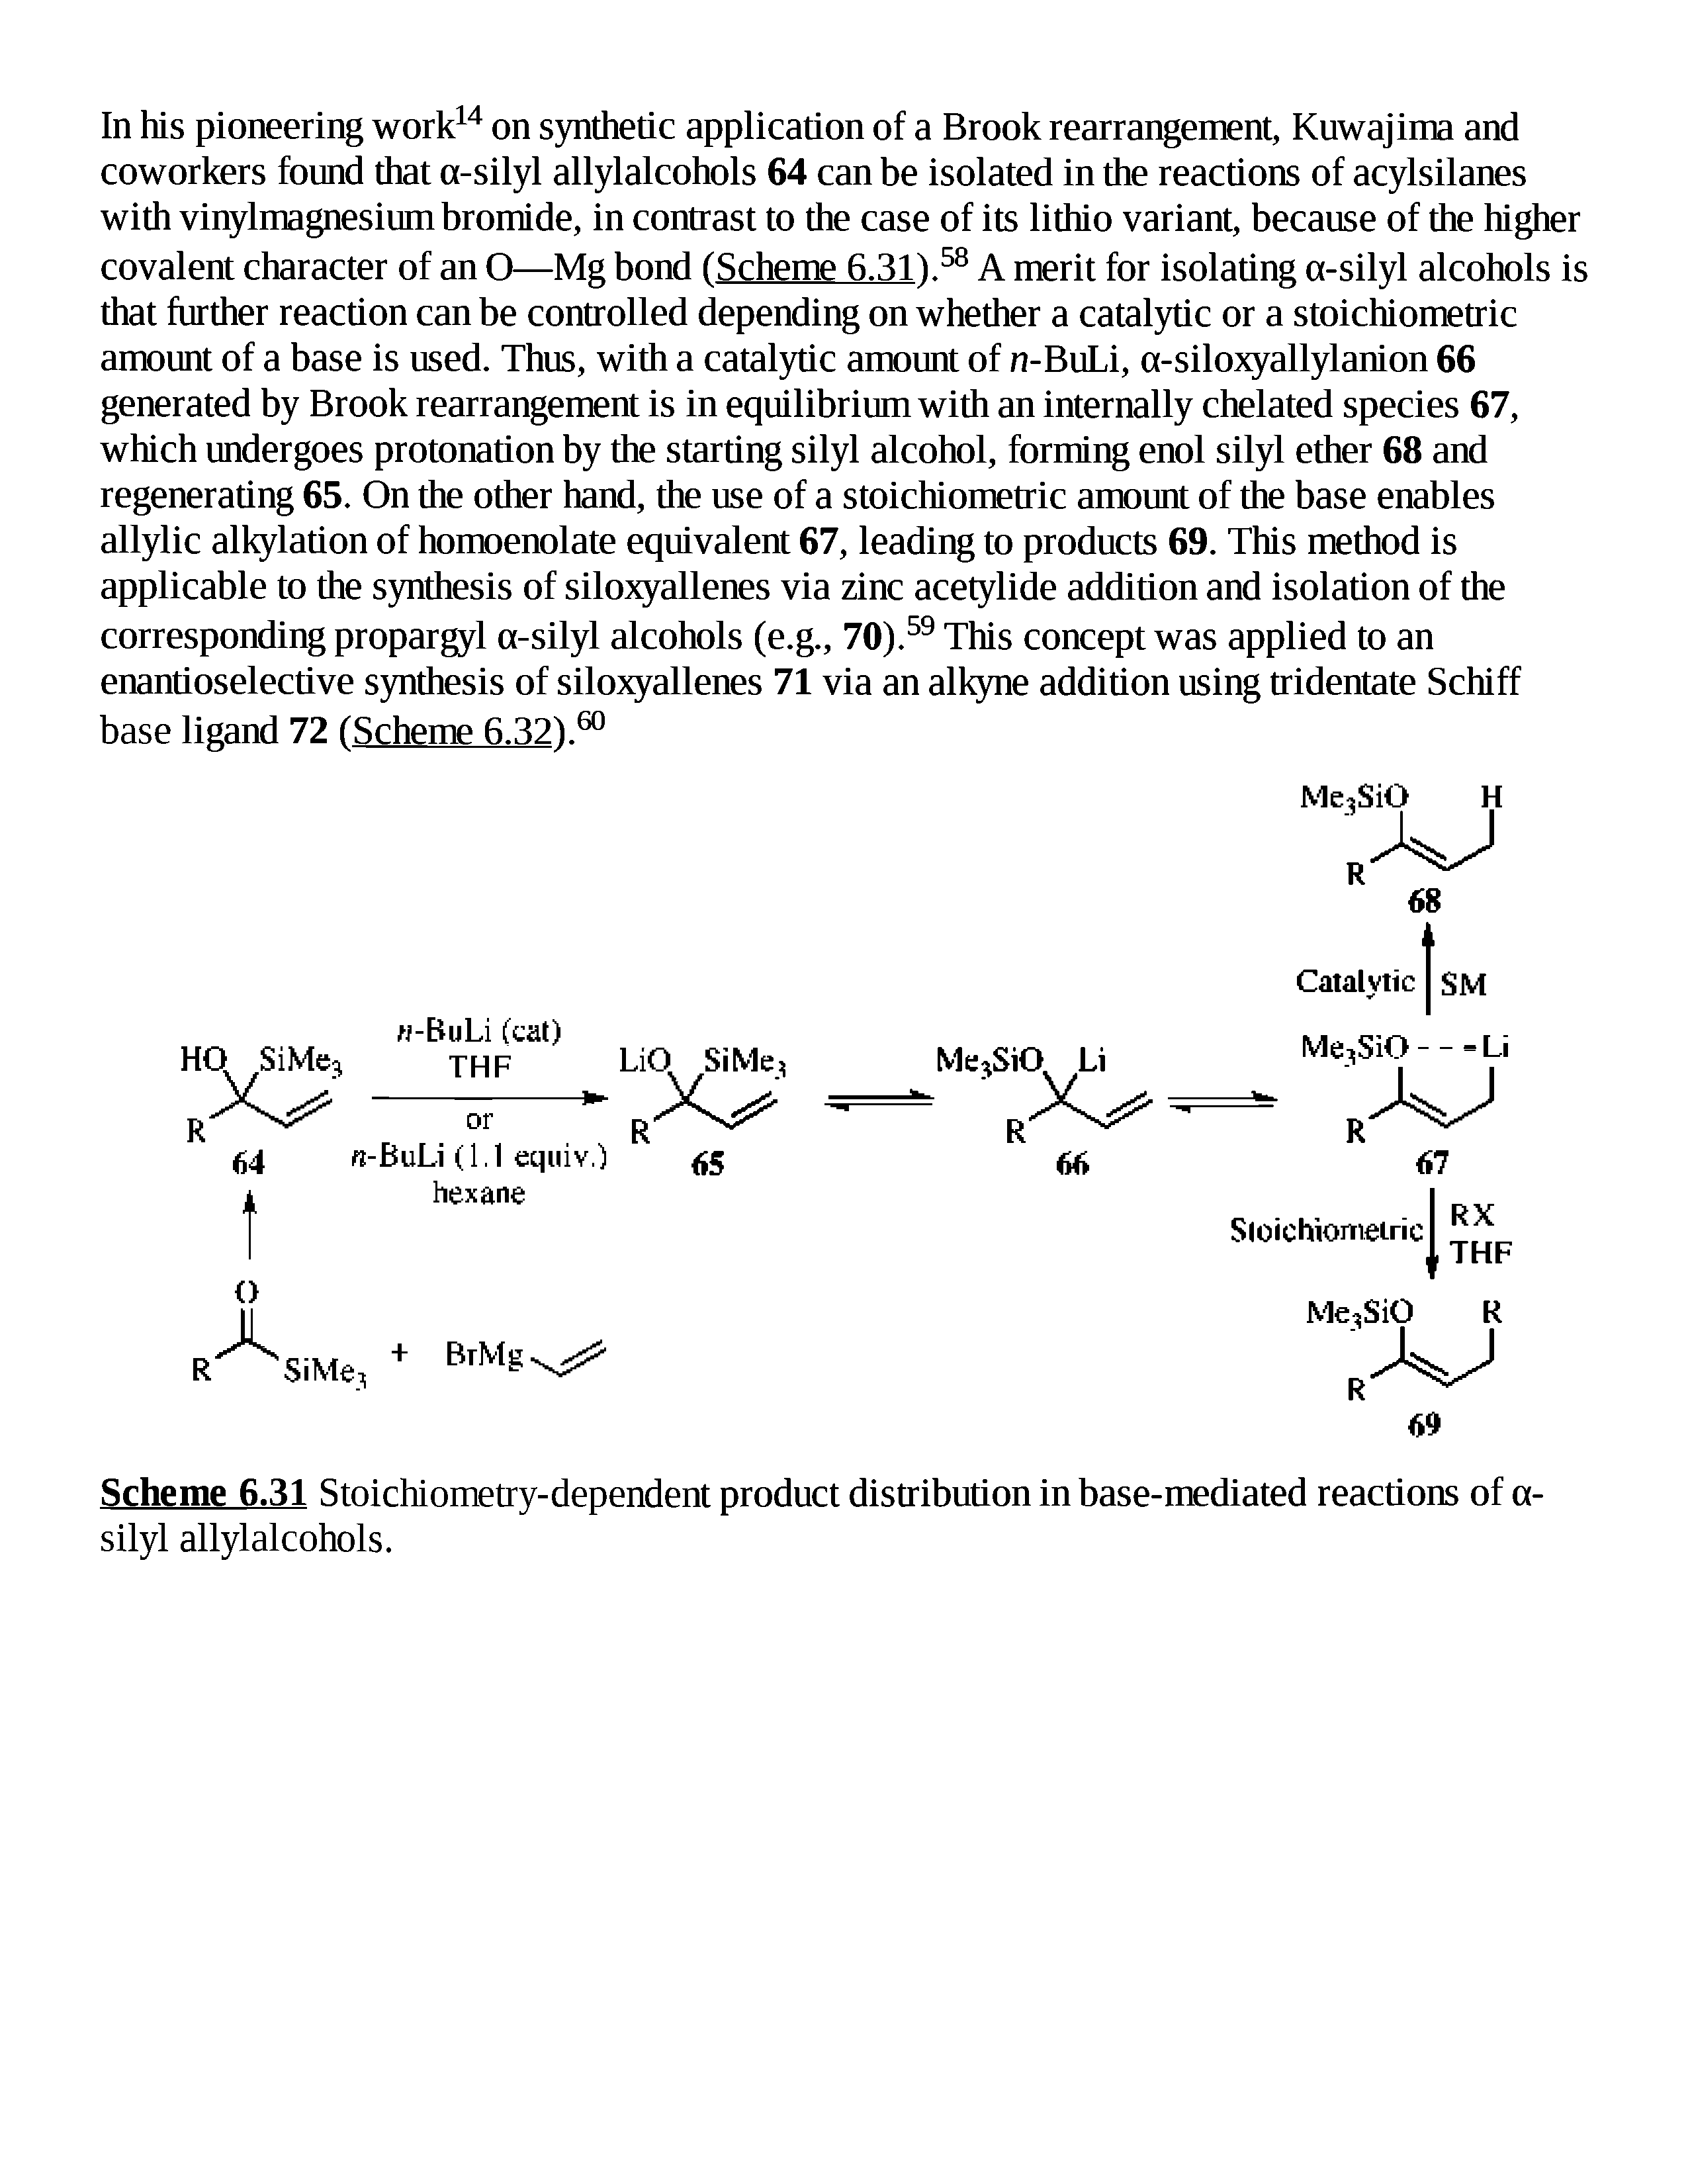 Scheme 6.31 Stoichiometry-dependent product distribution in base-mediated reactions of a-silyl allylalcohols.